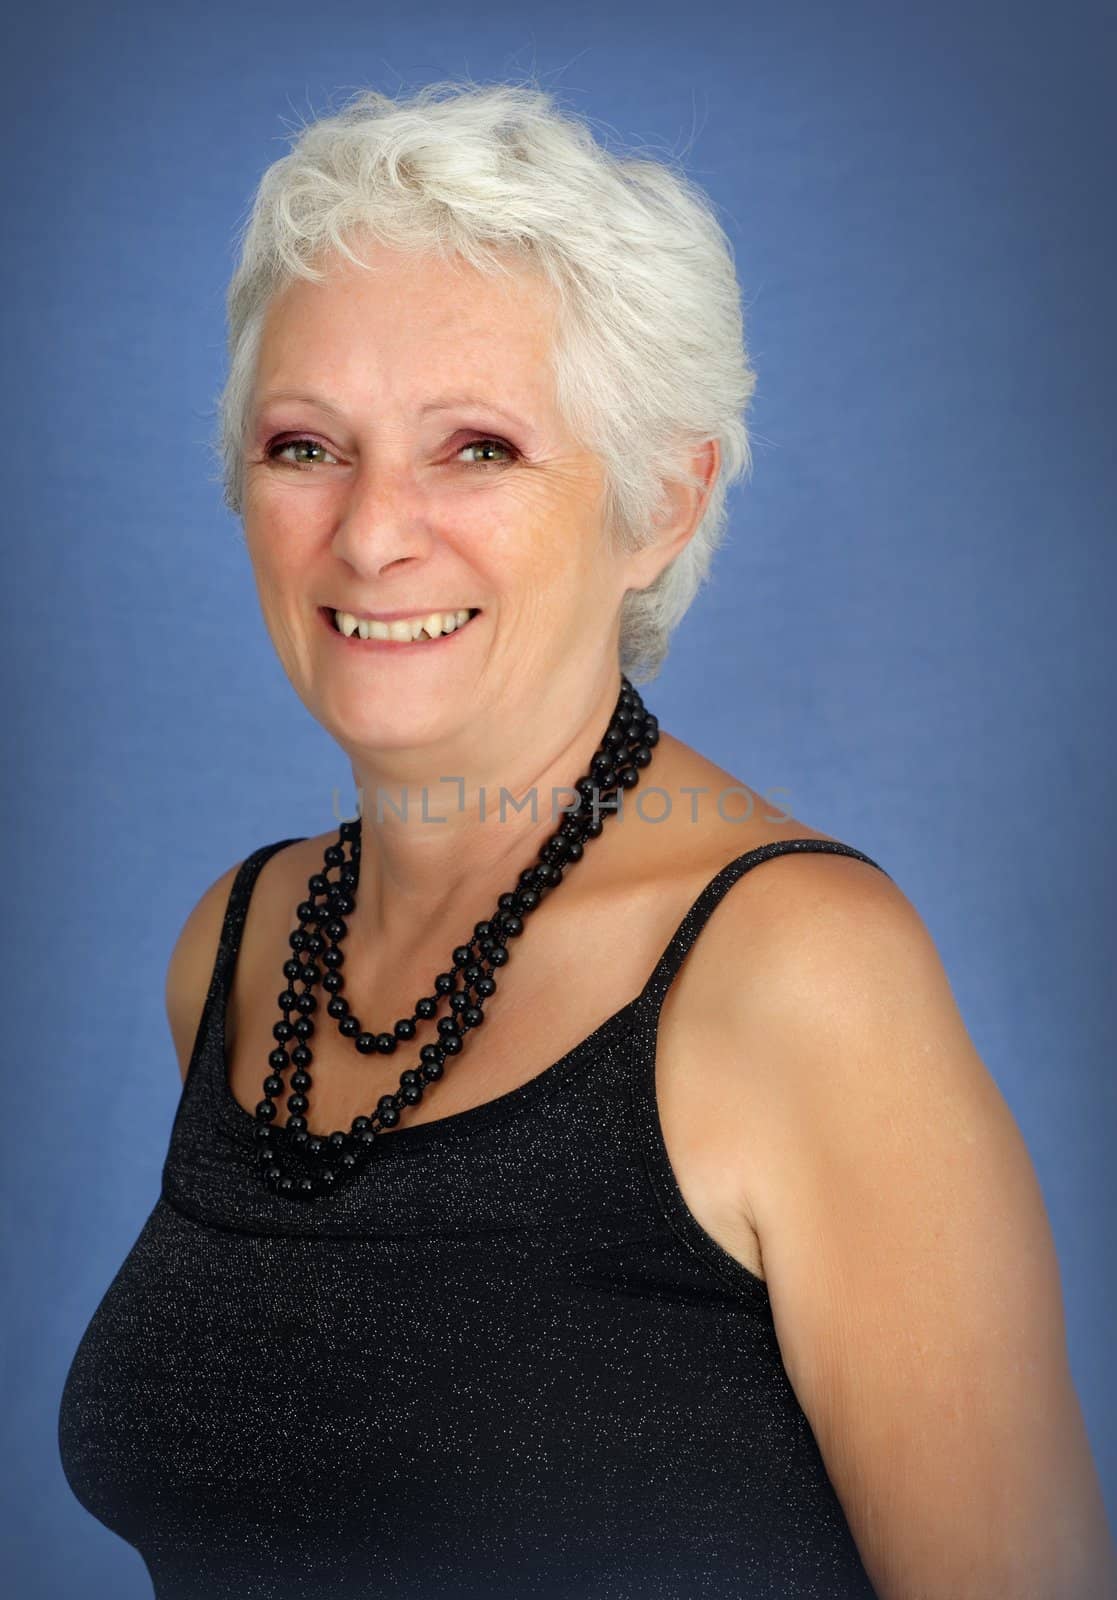 Happy smiling mature woman with white hair